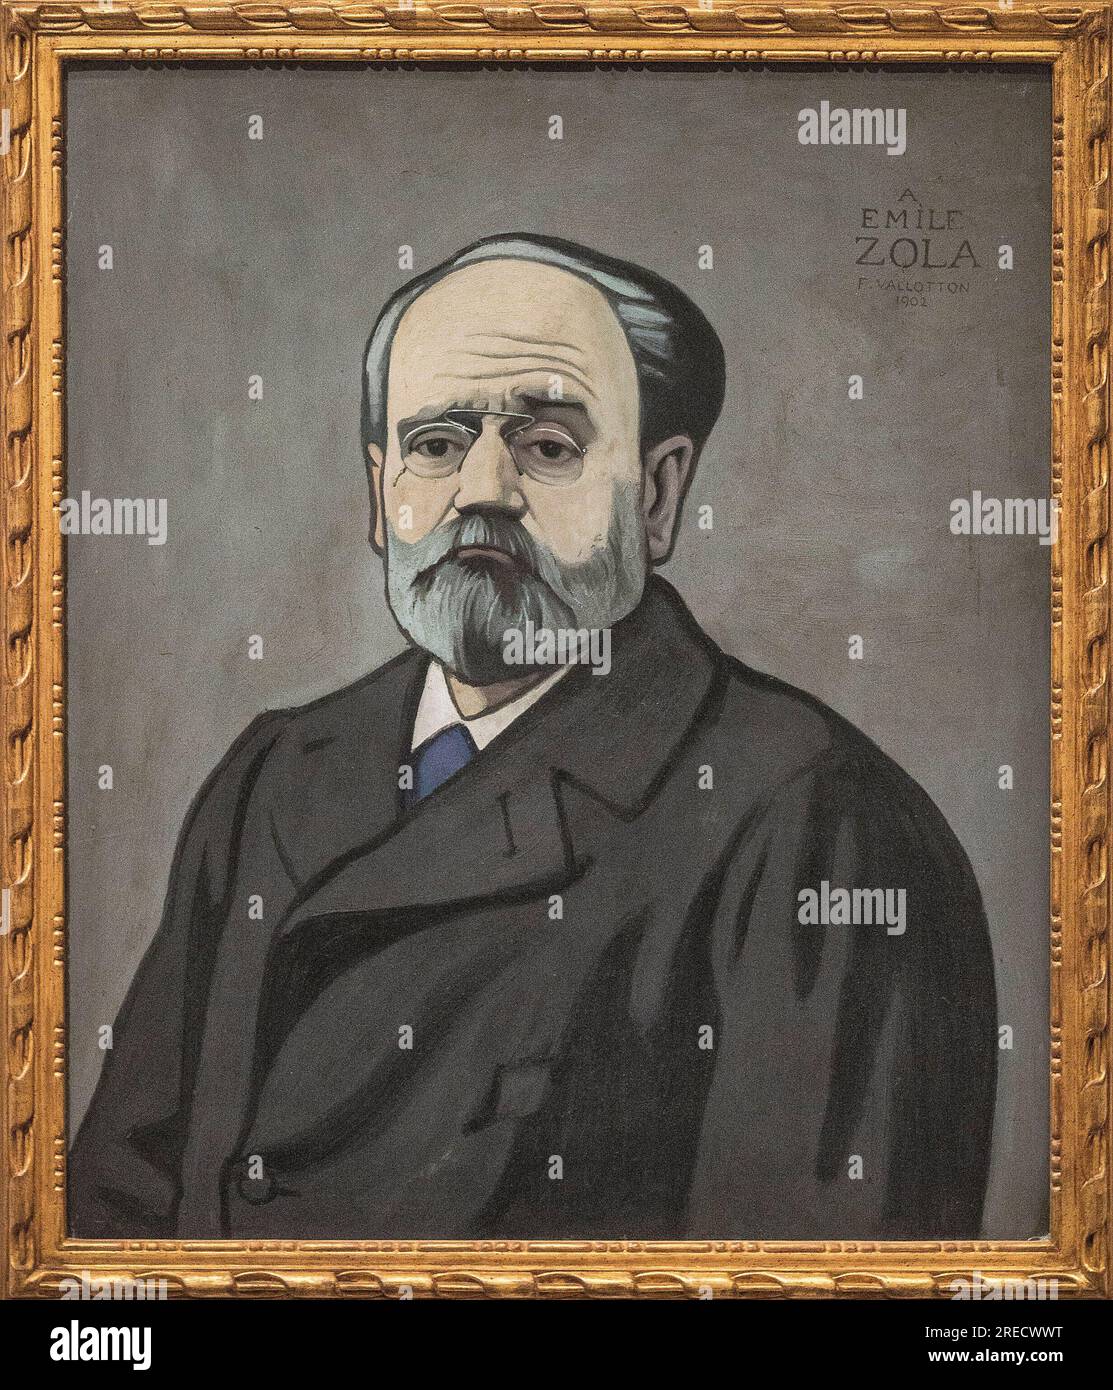 Emile zola art hi-res stock photography and images - Alamy